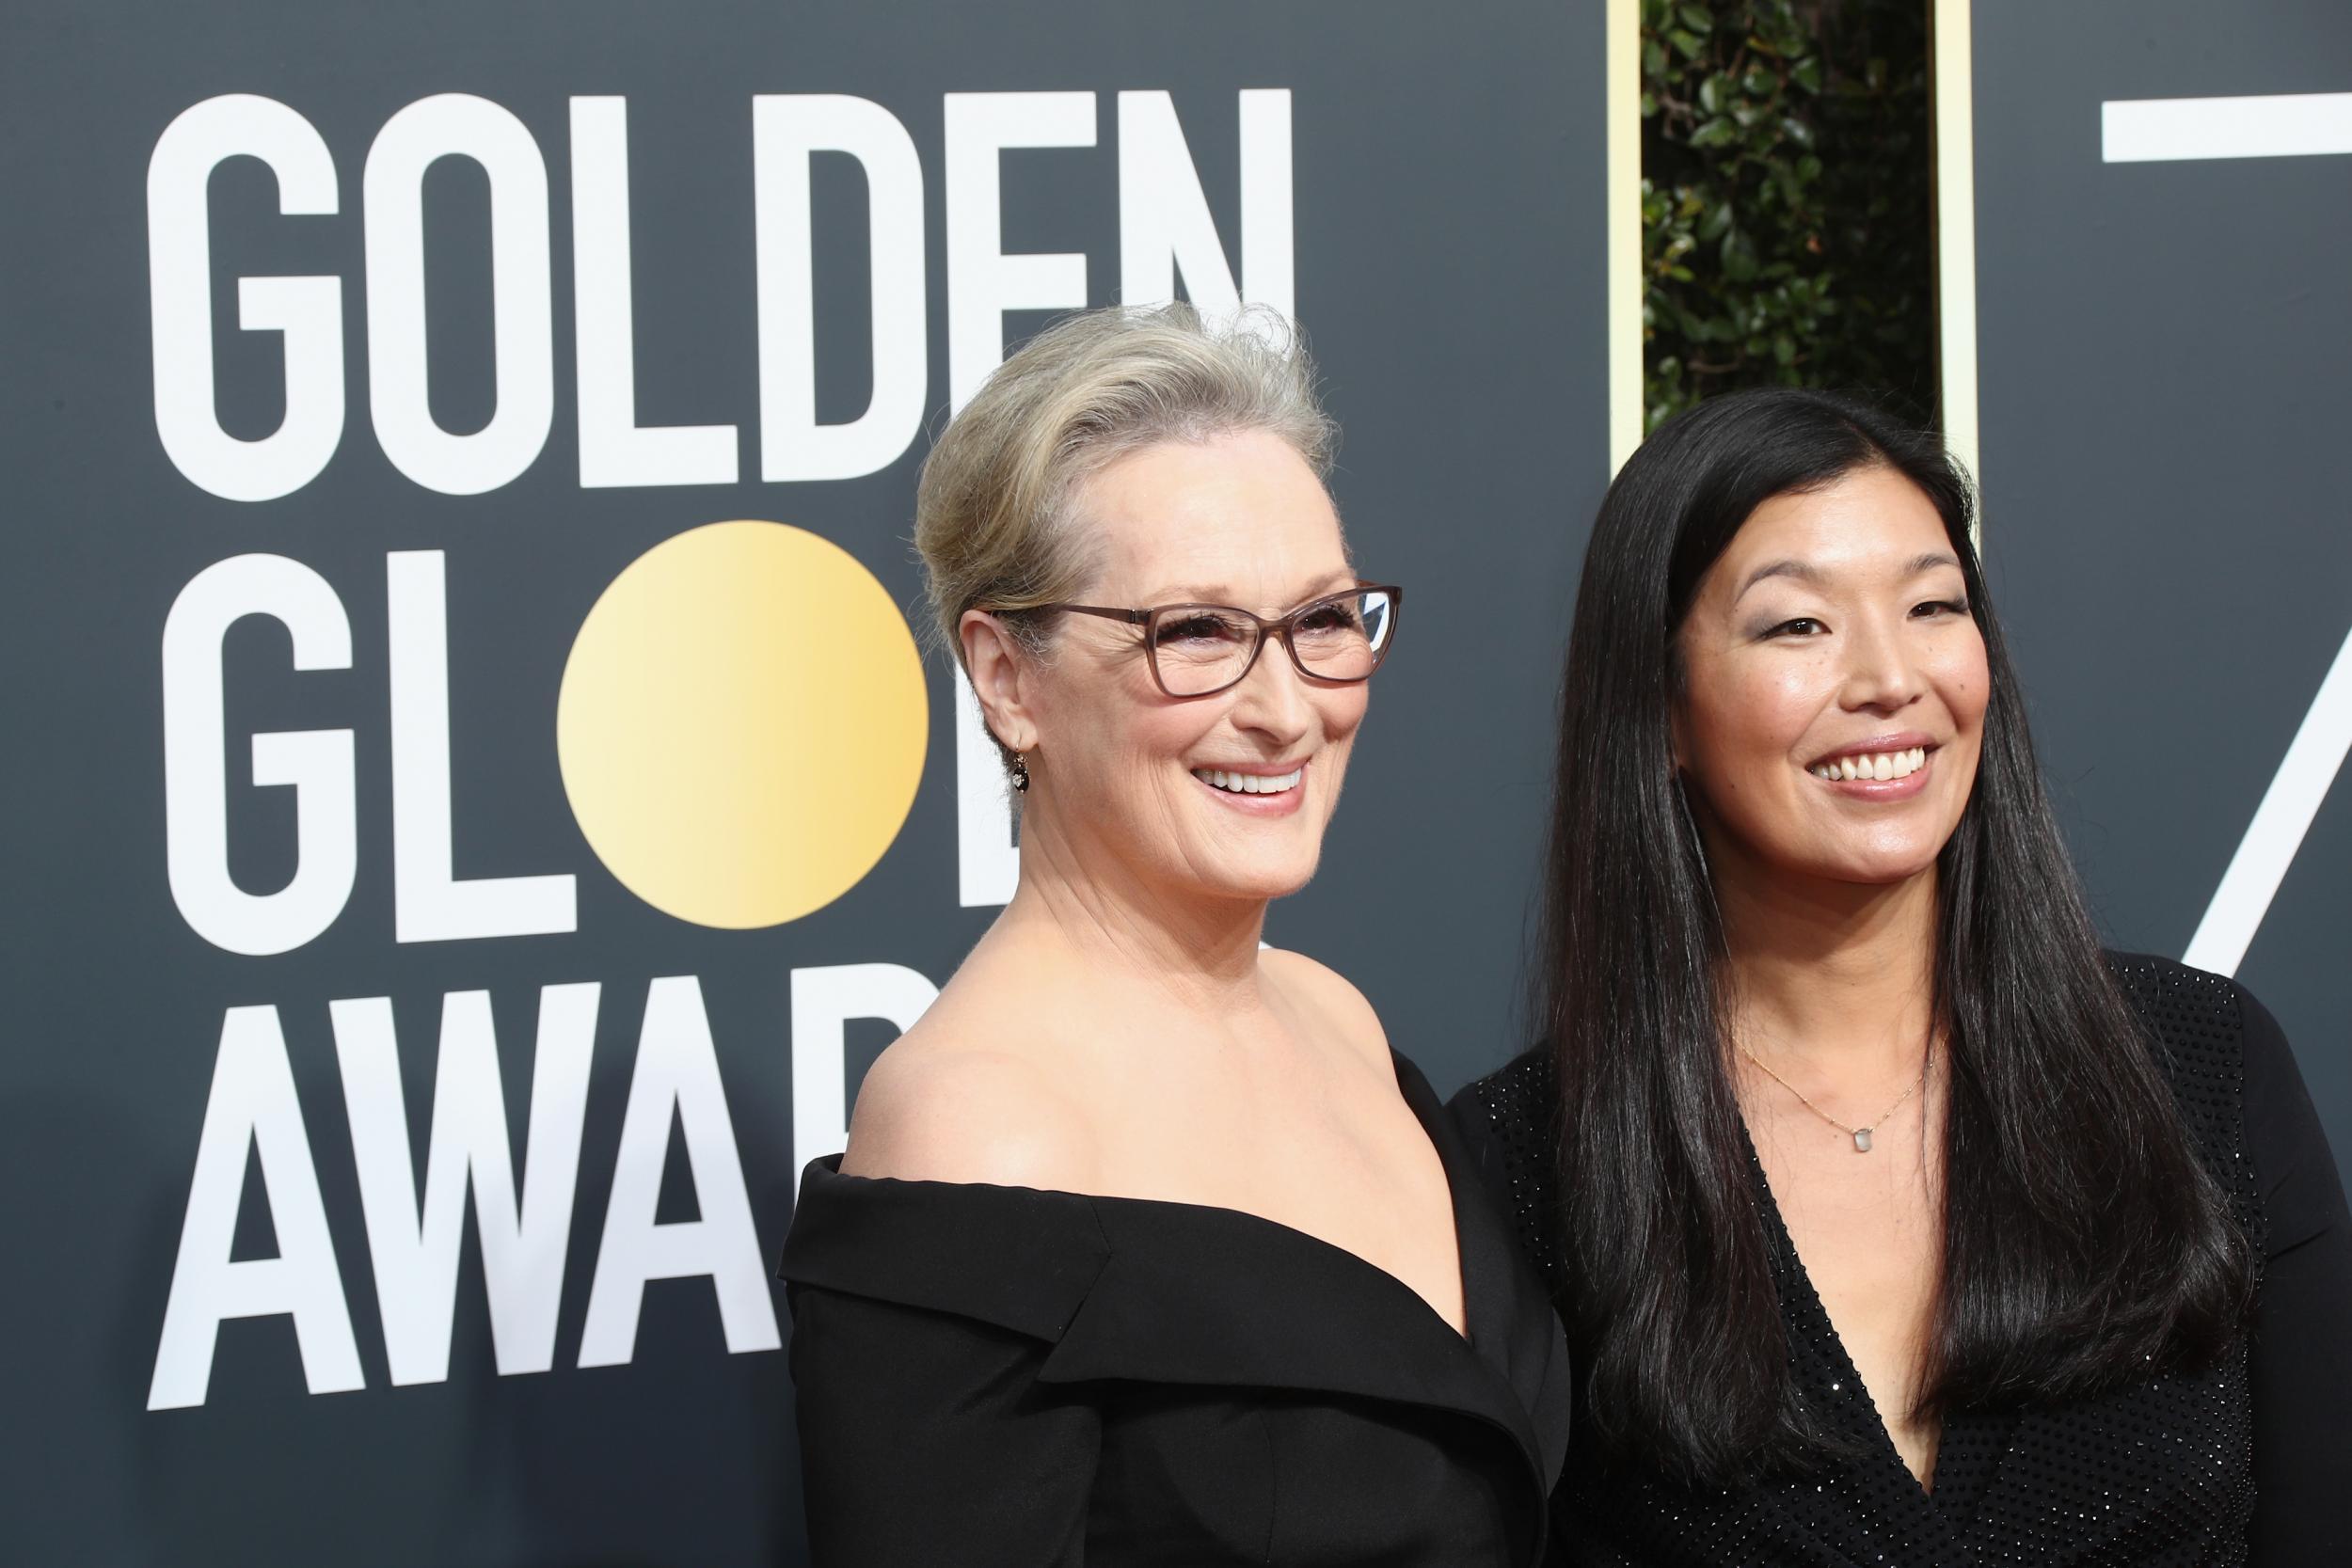 Meryl Streep (L) and Ai-jen Poo attends The 75th Annual Golden Globe Awards at The Beverly Hilton Hotel on January 7, 2018 in Beverly Hills, California. Credit: Frederick M. Brown/Getty Images.